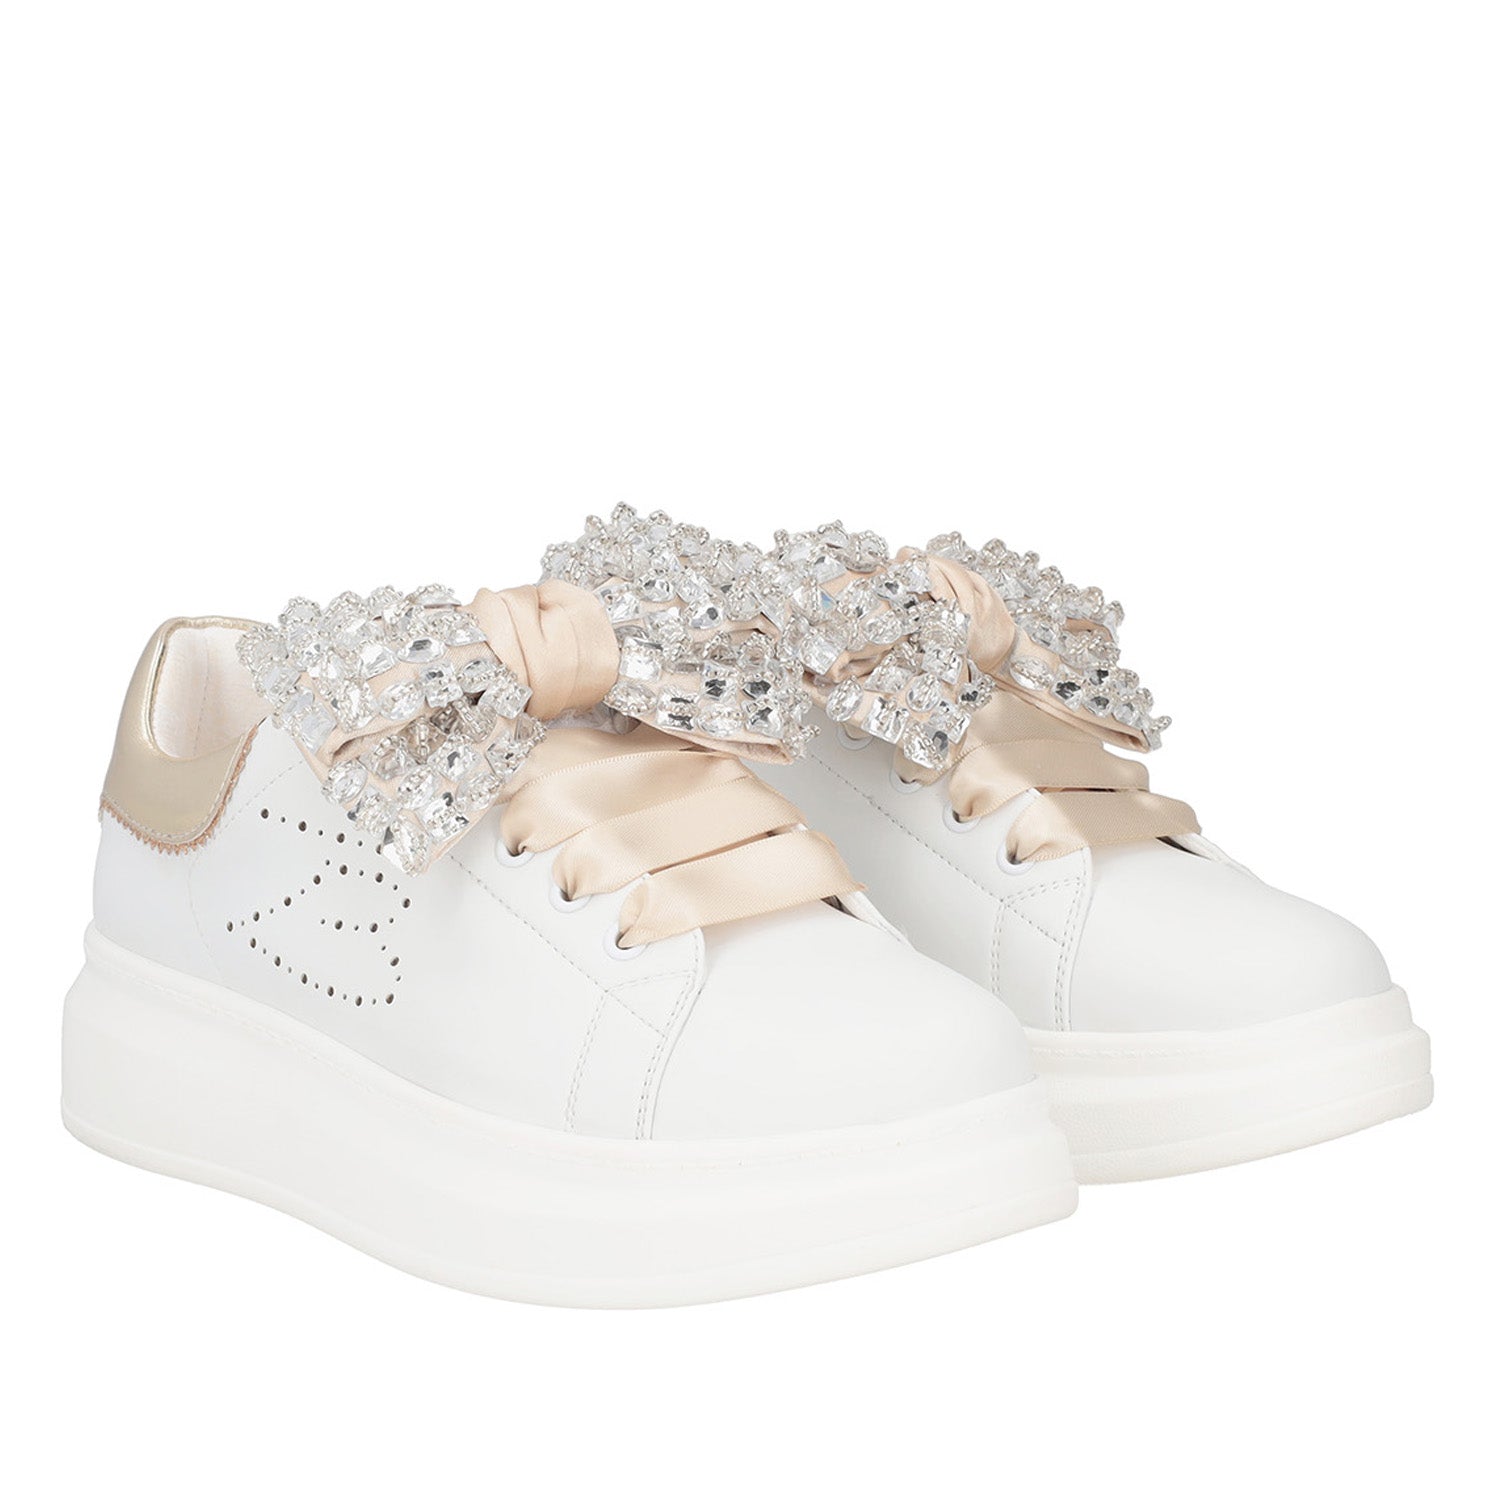 WHITE/GOLD GLAMOUR SNEAKER IN LEATHER WITH RHINESTONE BOW